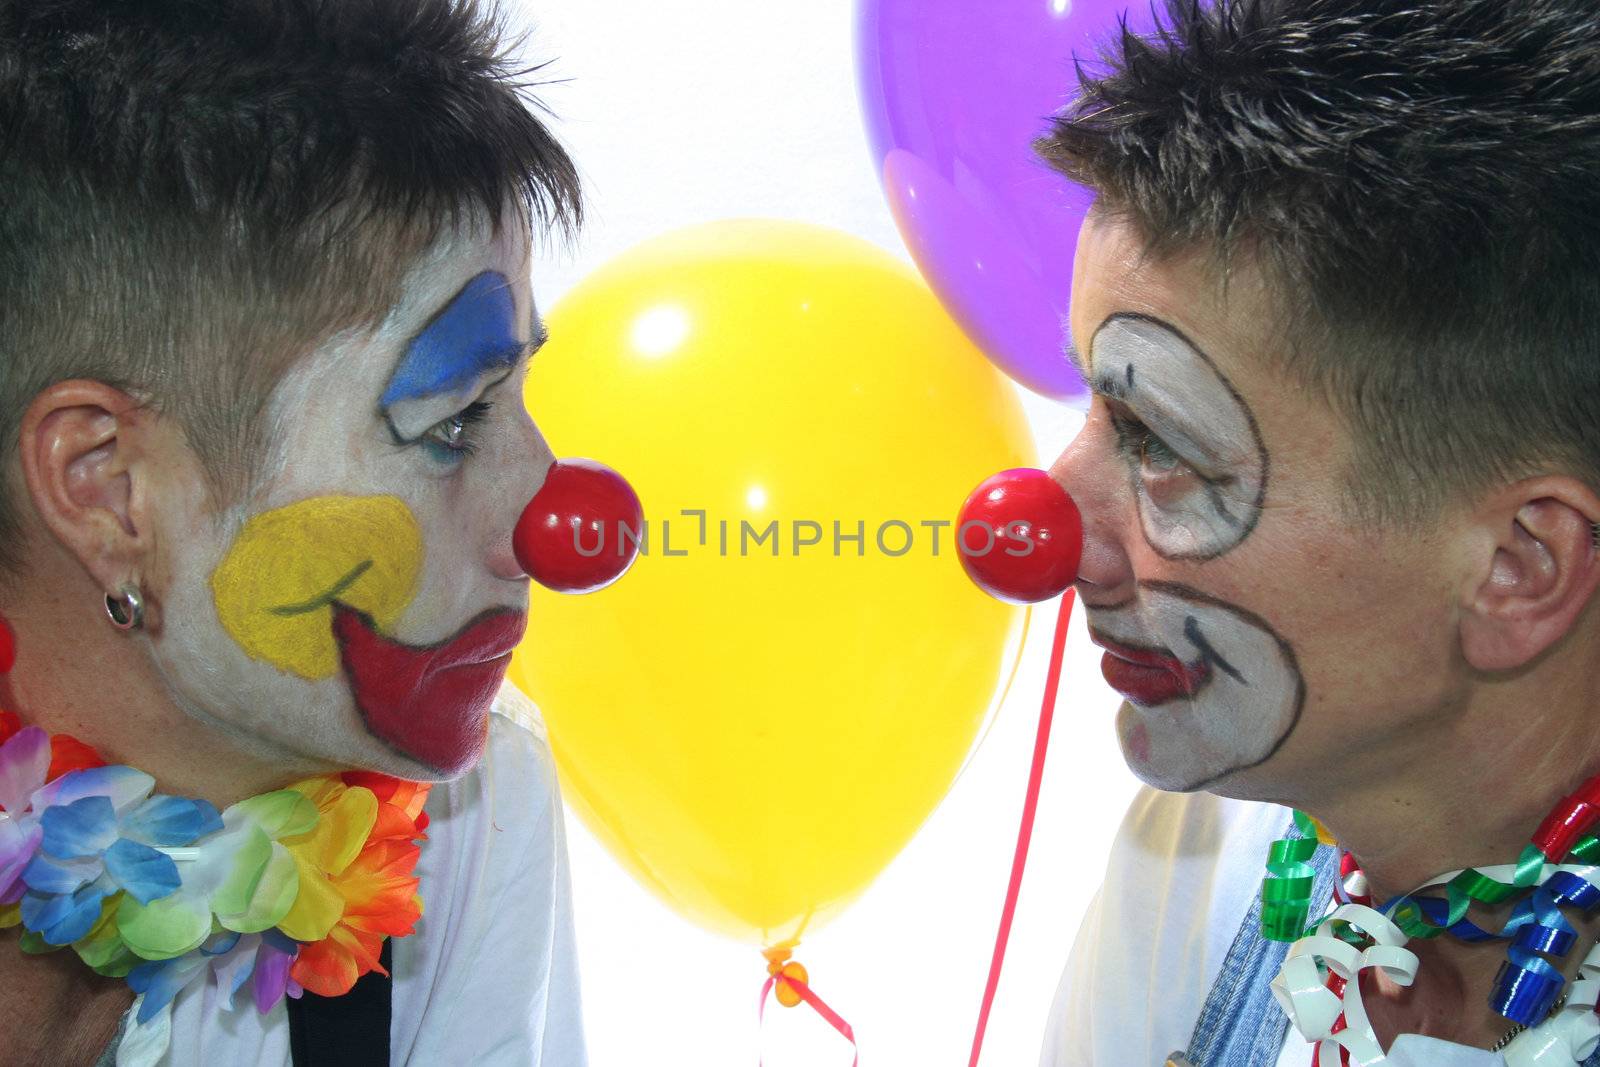 Two clowns look at each other with red nose